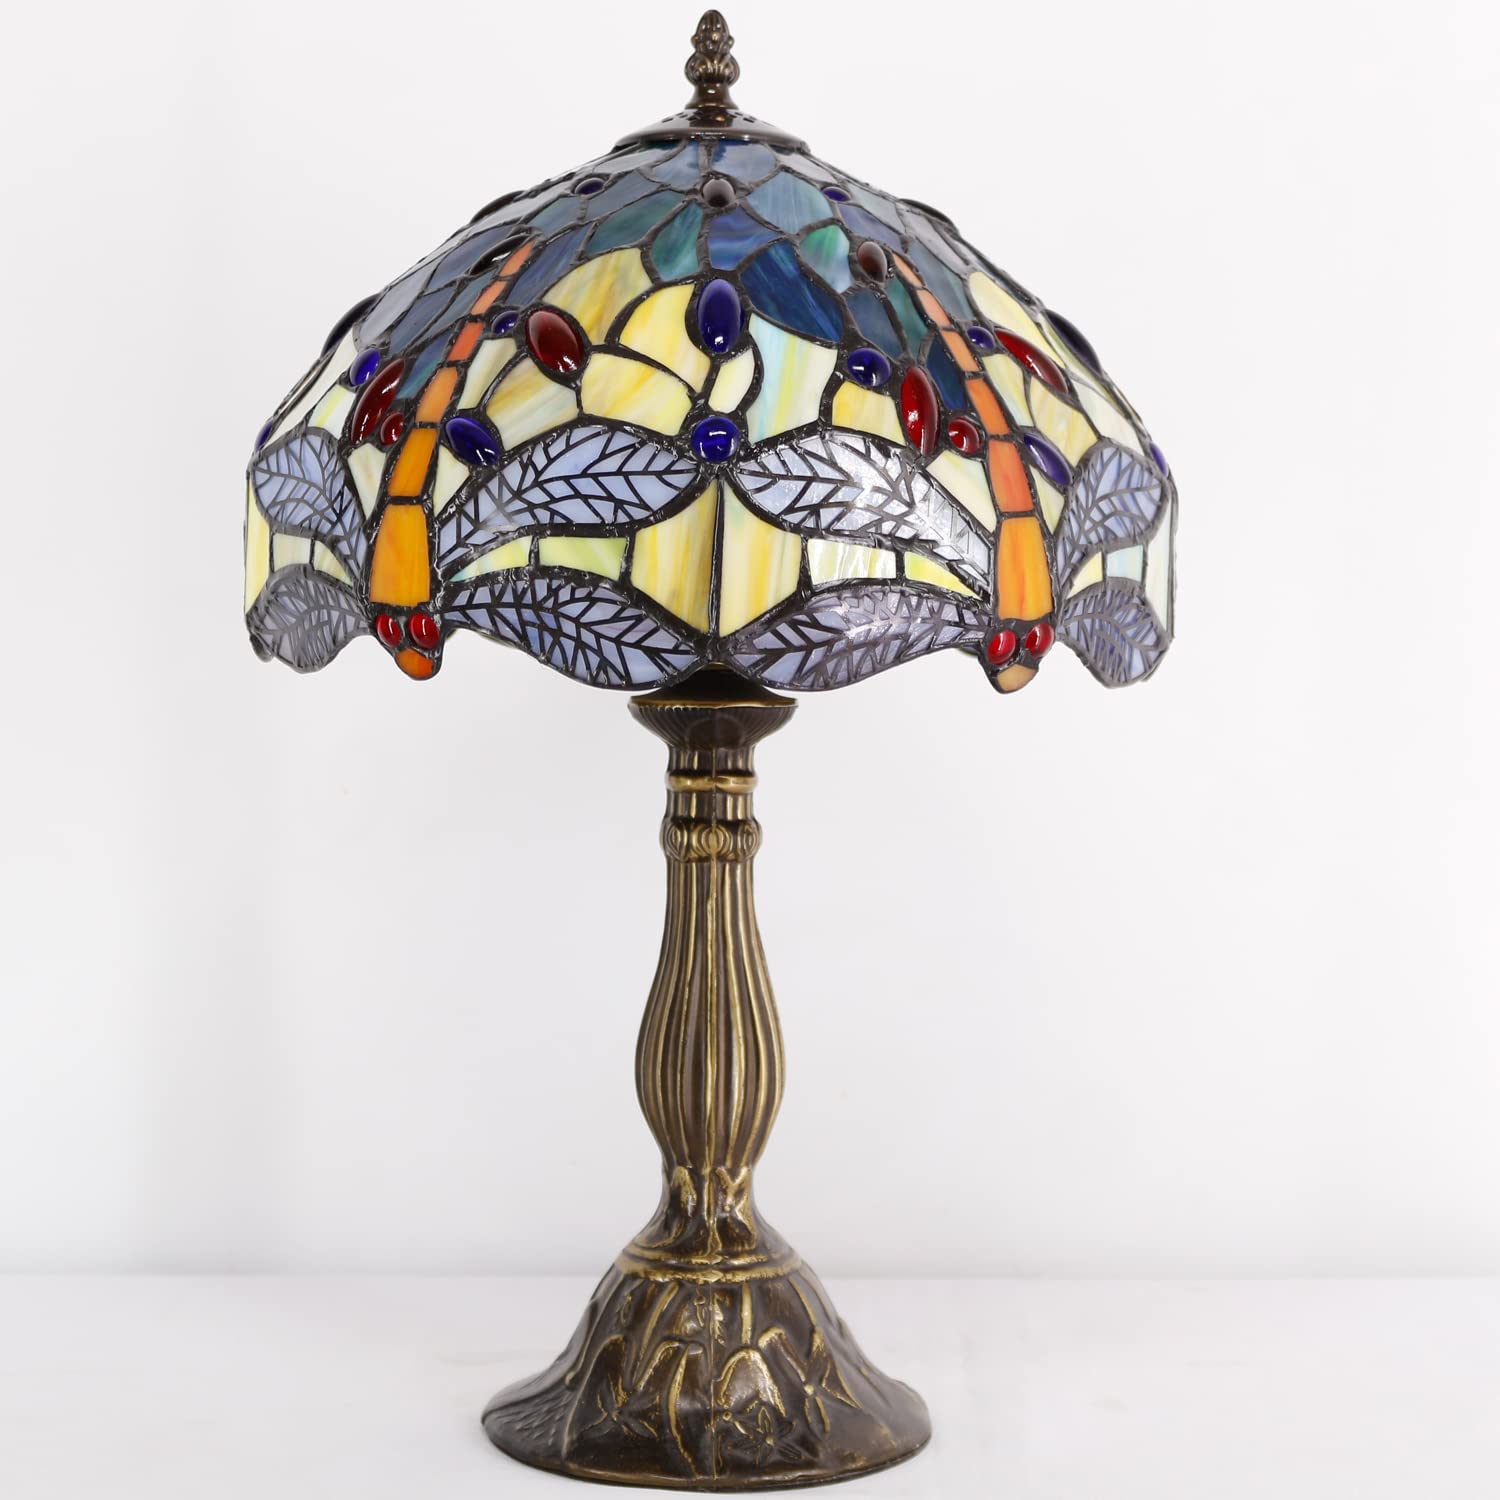 SHADY  Lamp Sea Blue Yellow Stained Glass Dragonfly Style Table Lamp Nautical Reading Desk Bedside Light 12X12X18 Inches Decor Bedroom Living Room Home Office S128 Series